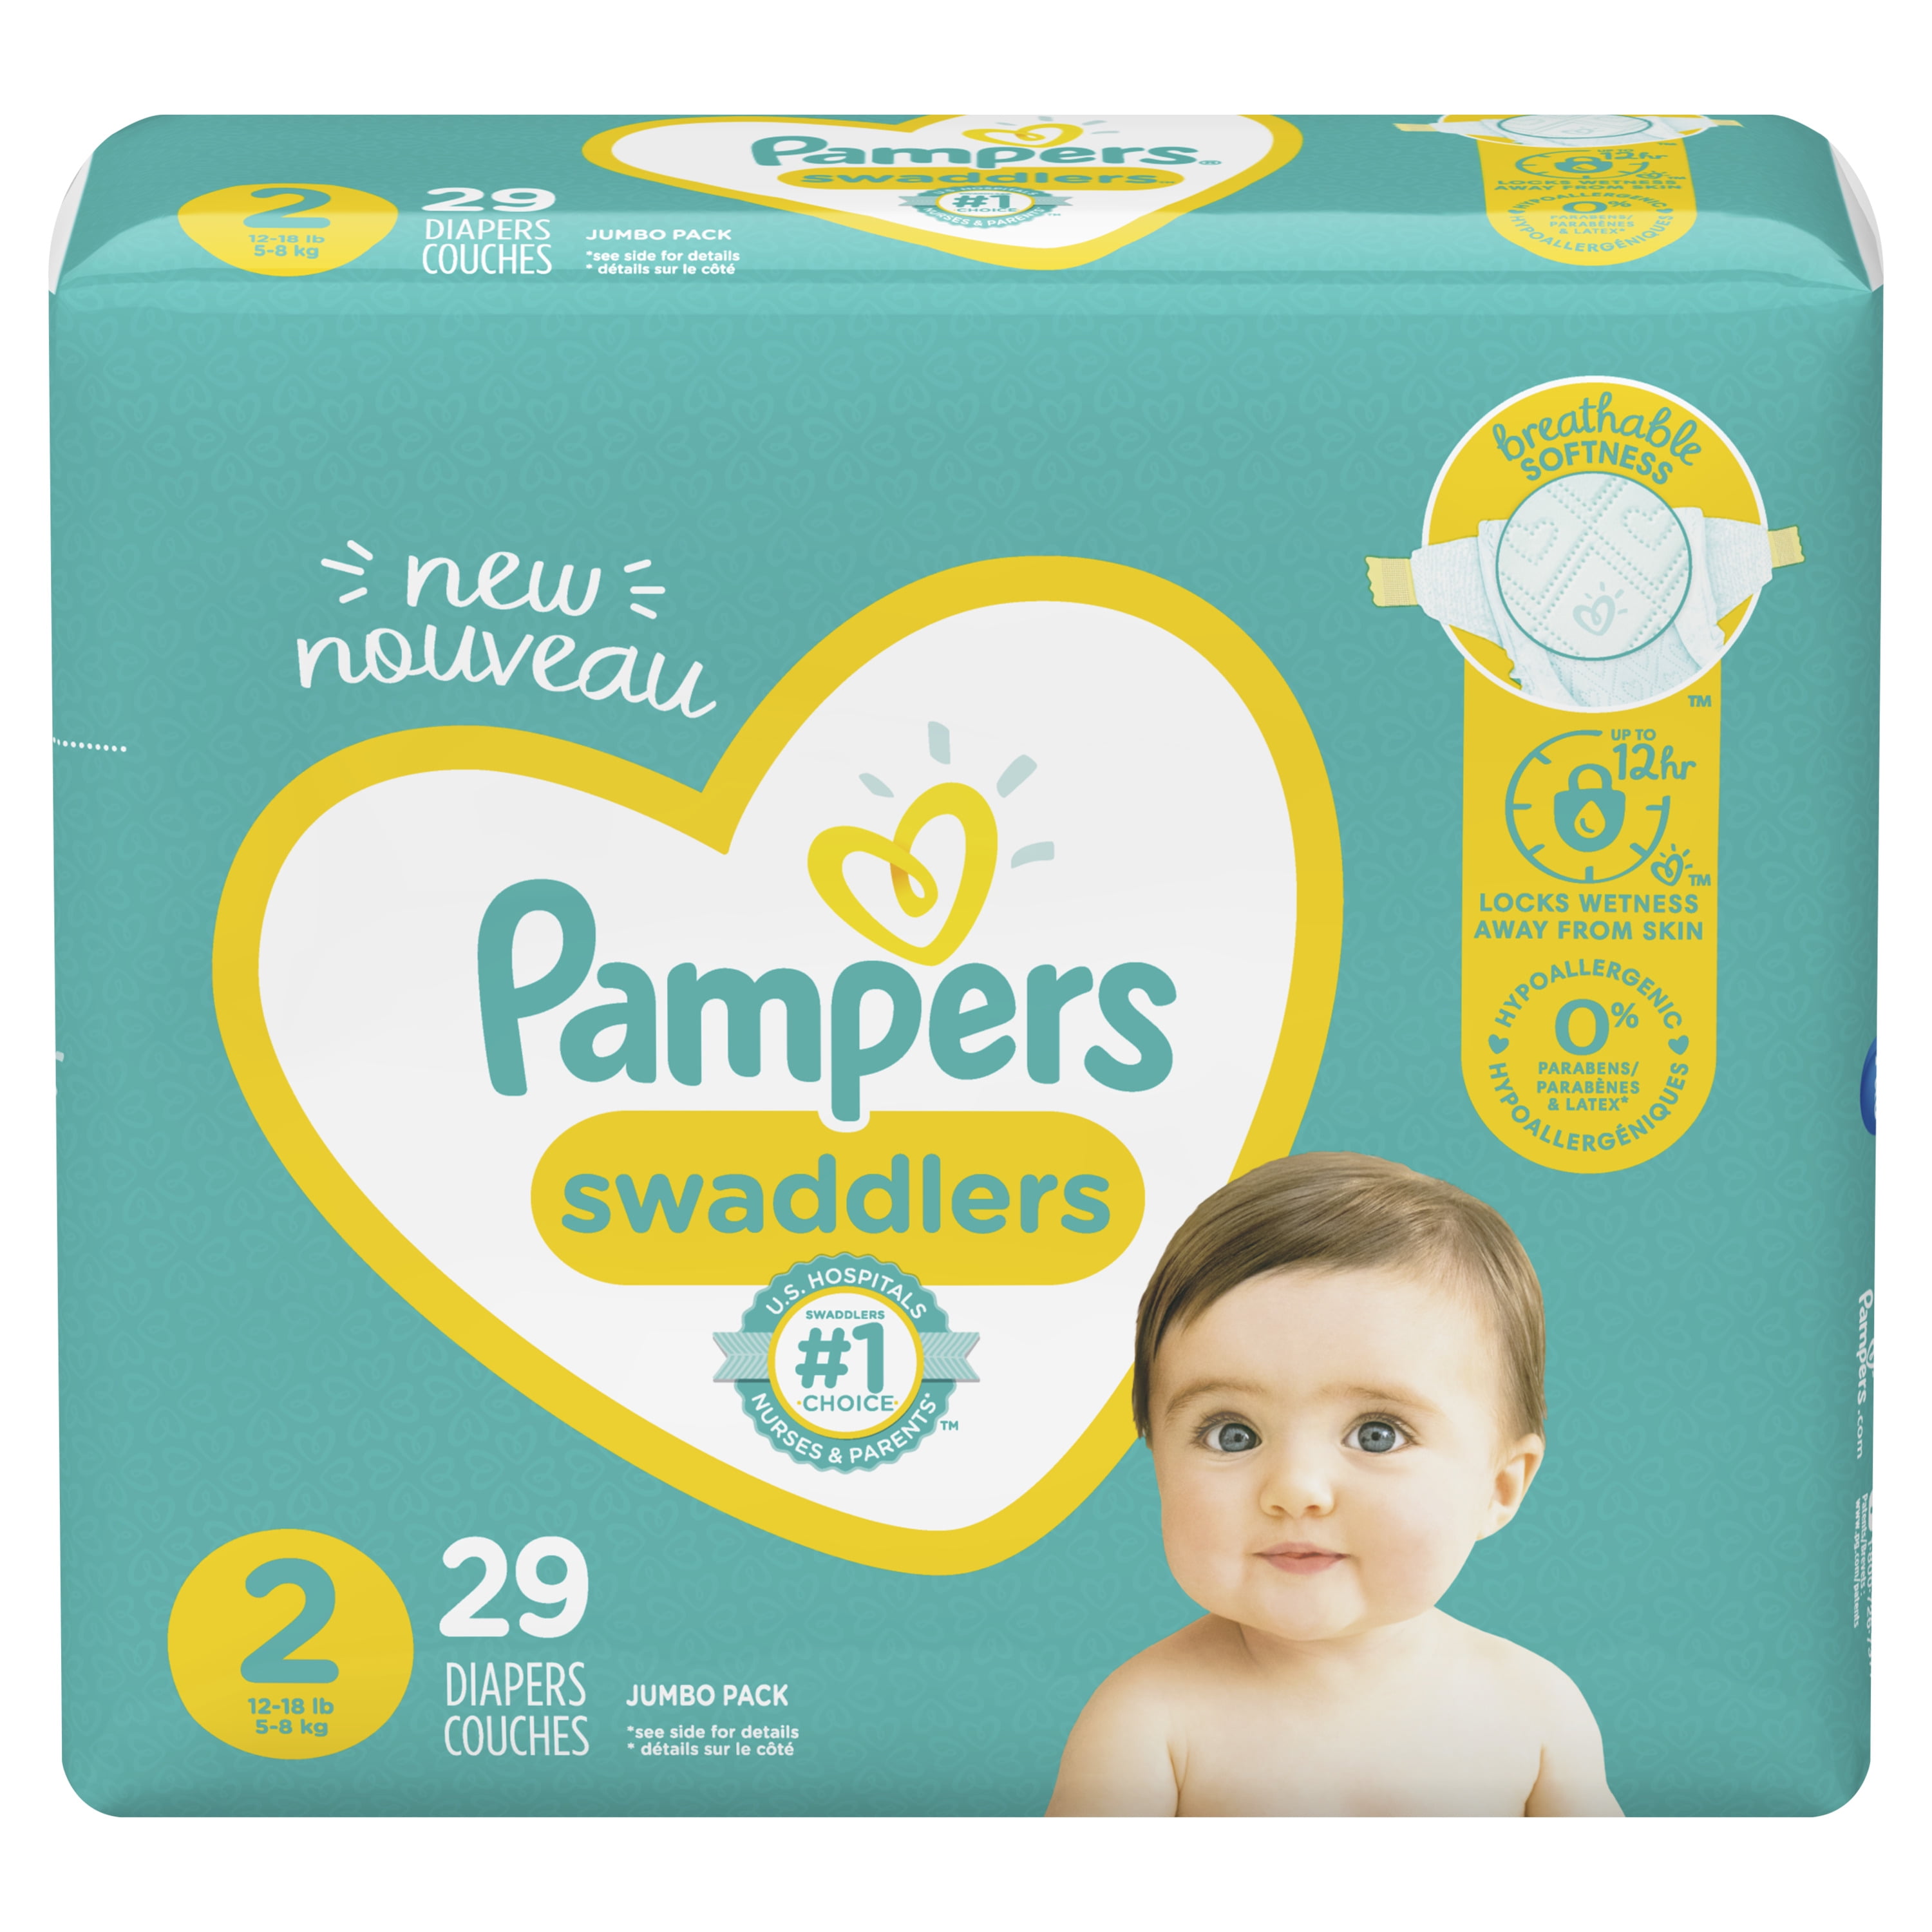 Pampers Diapers, and Absorbent, Size 2, 29 -